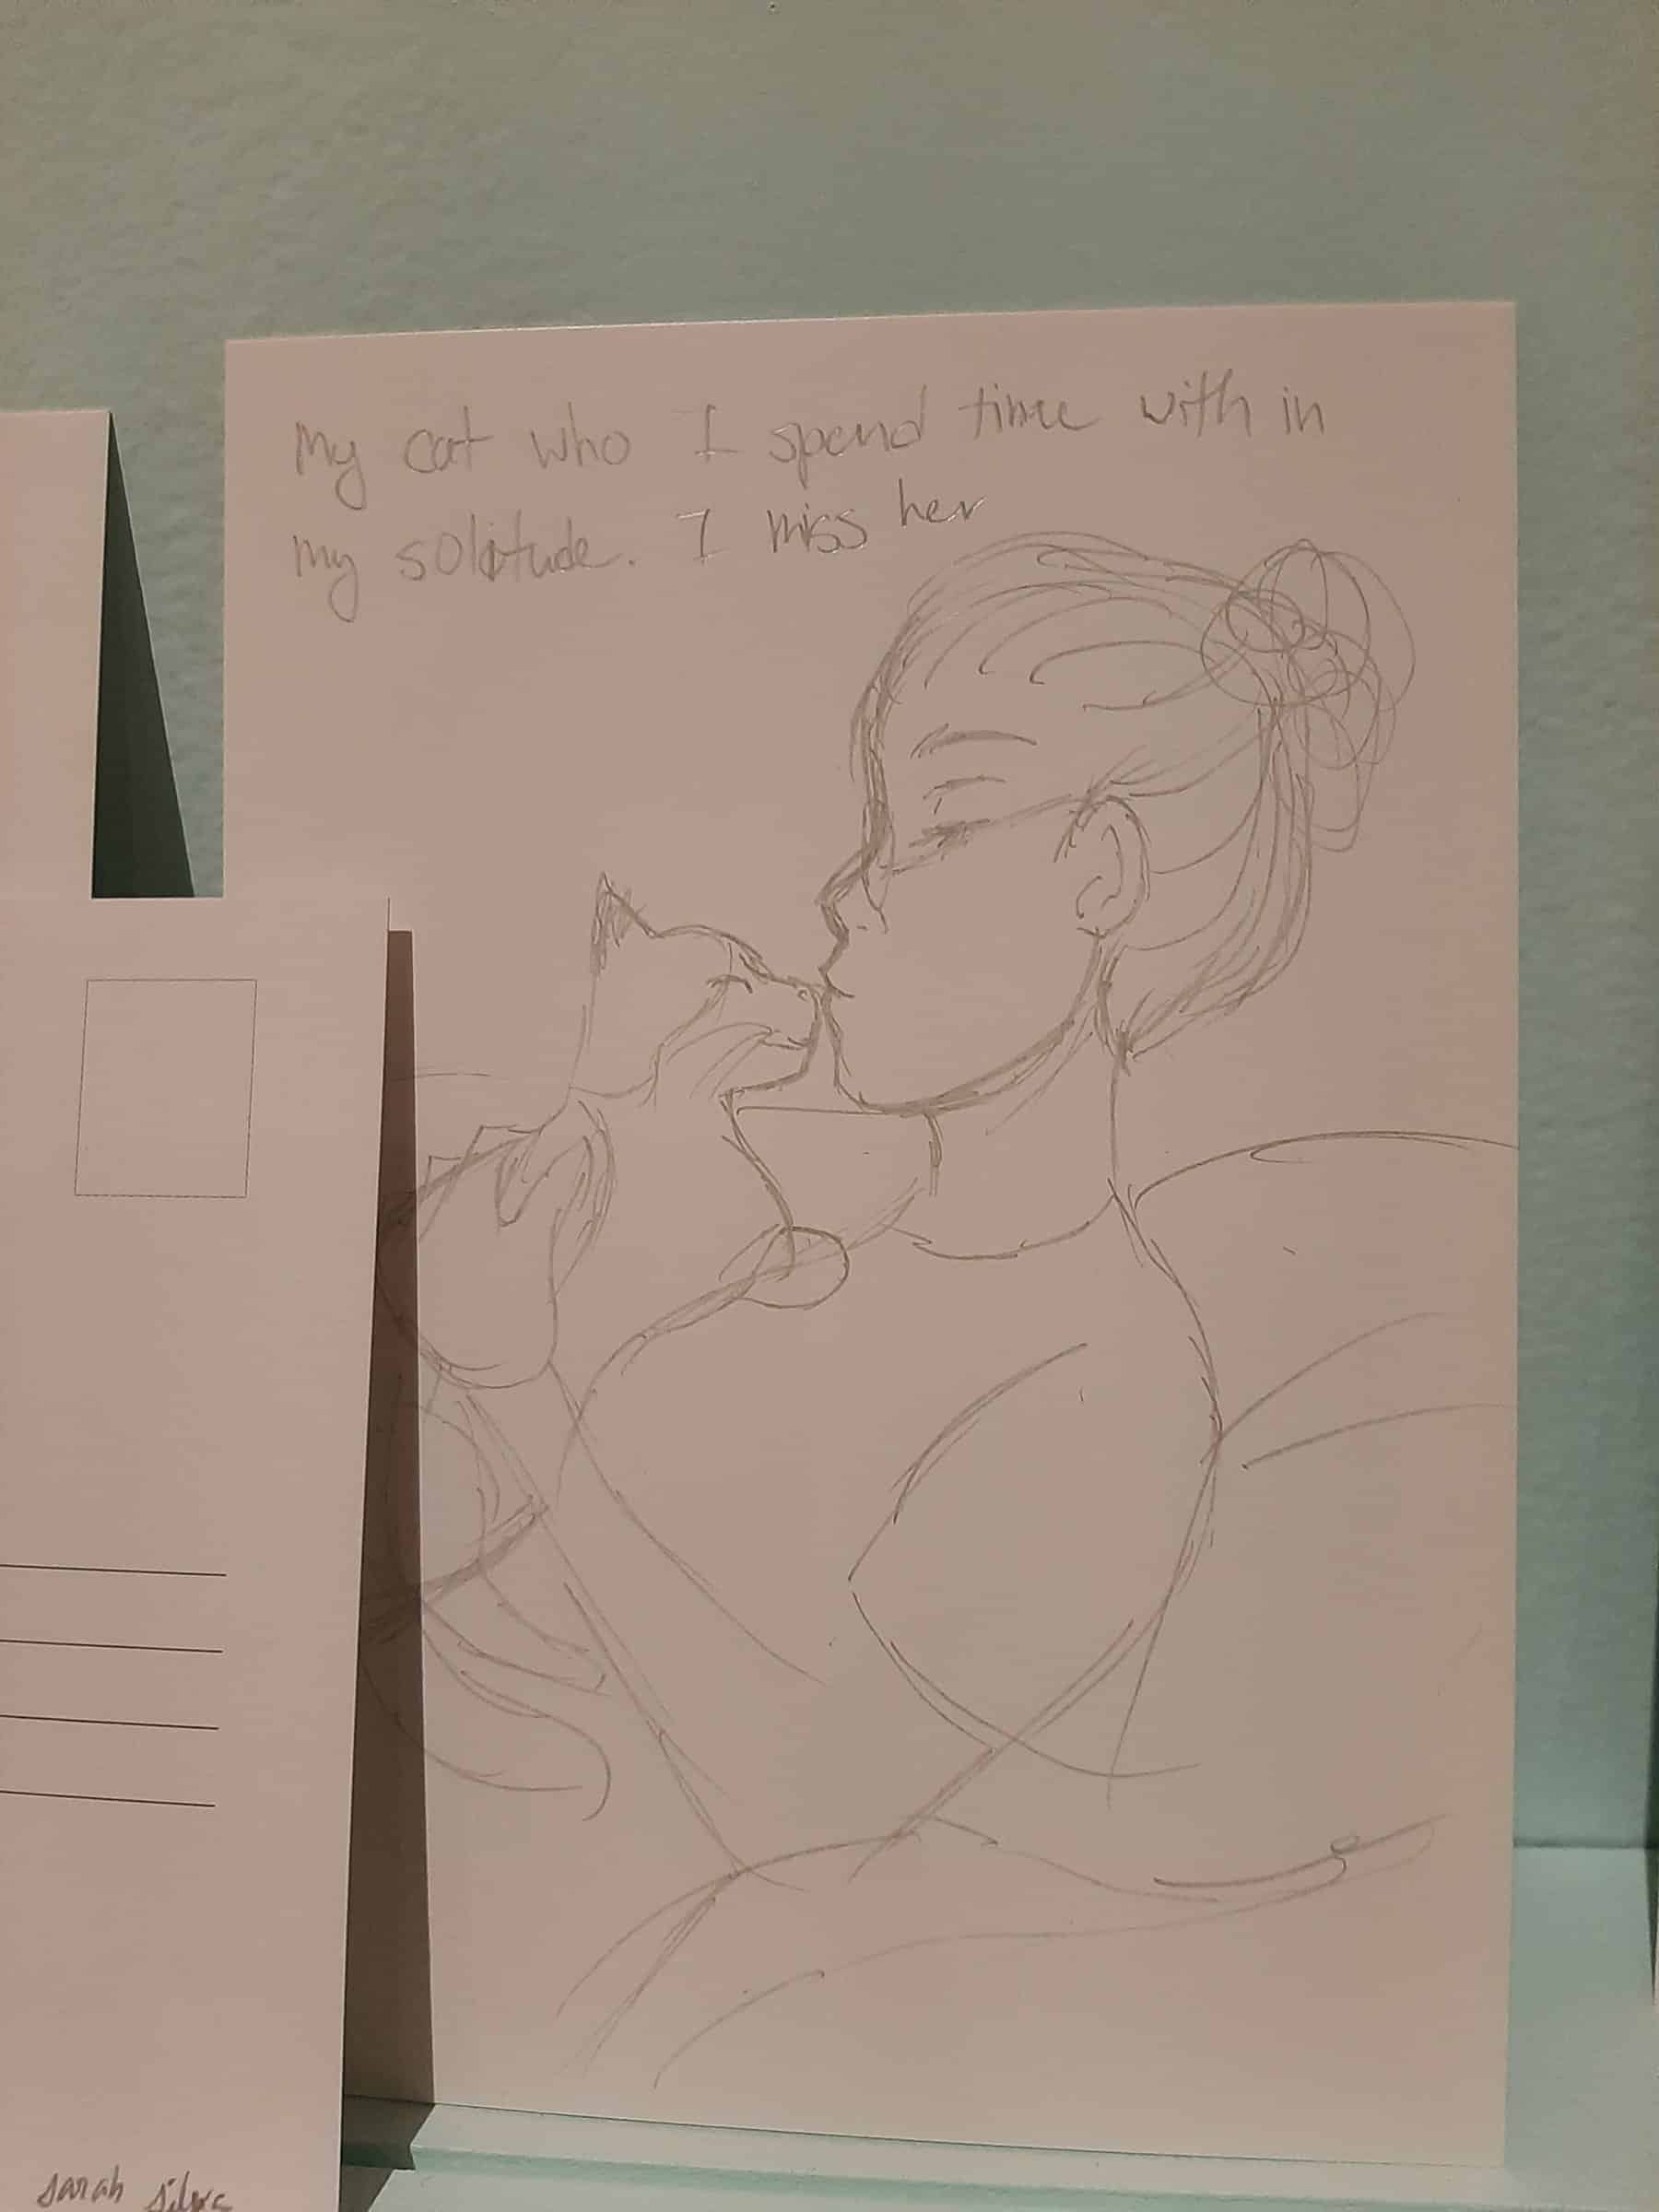 Postcard with a drawing of a girl holding a cat and text reading “My cat who I spend time with in my solitude. I miss her.”